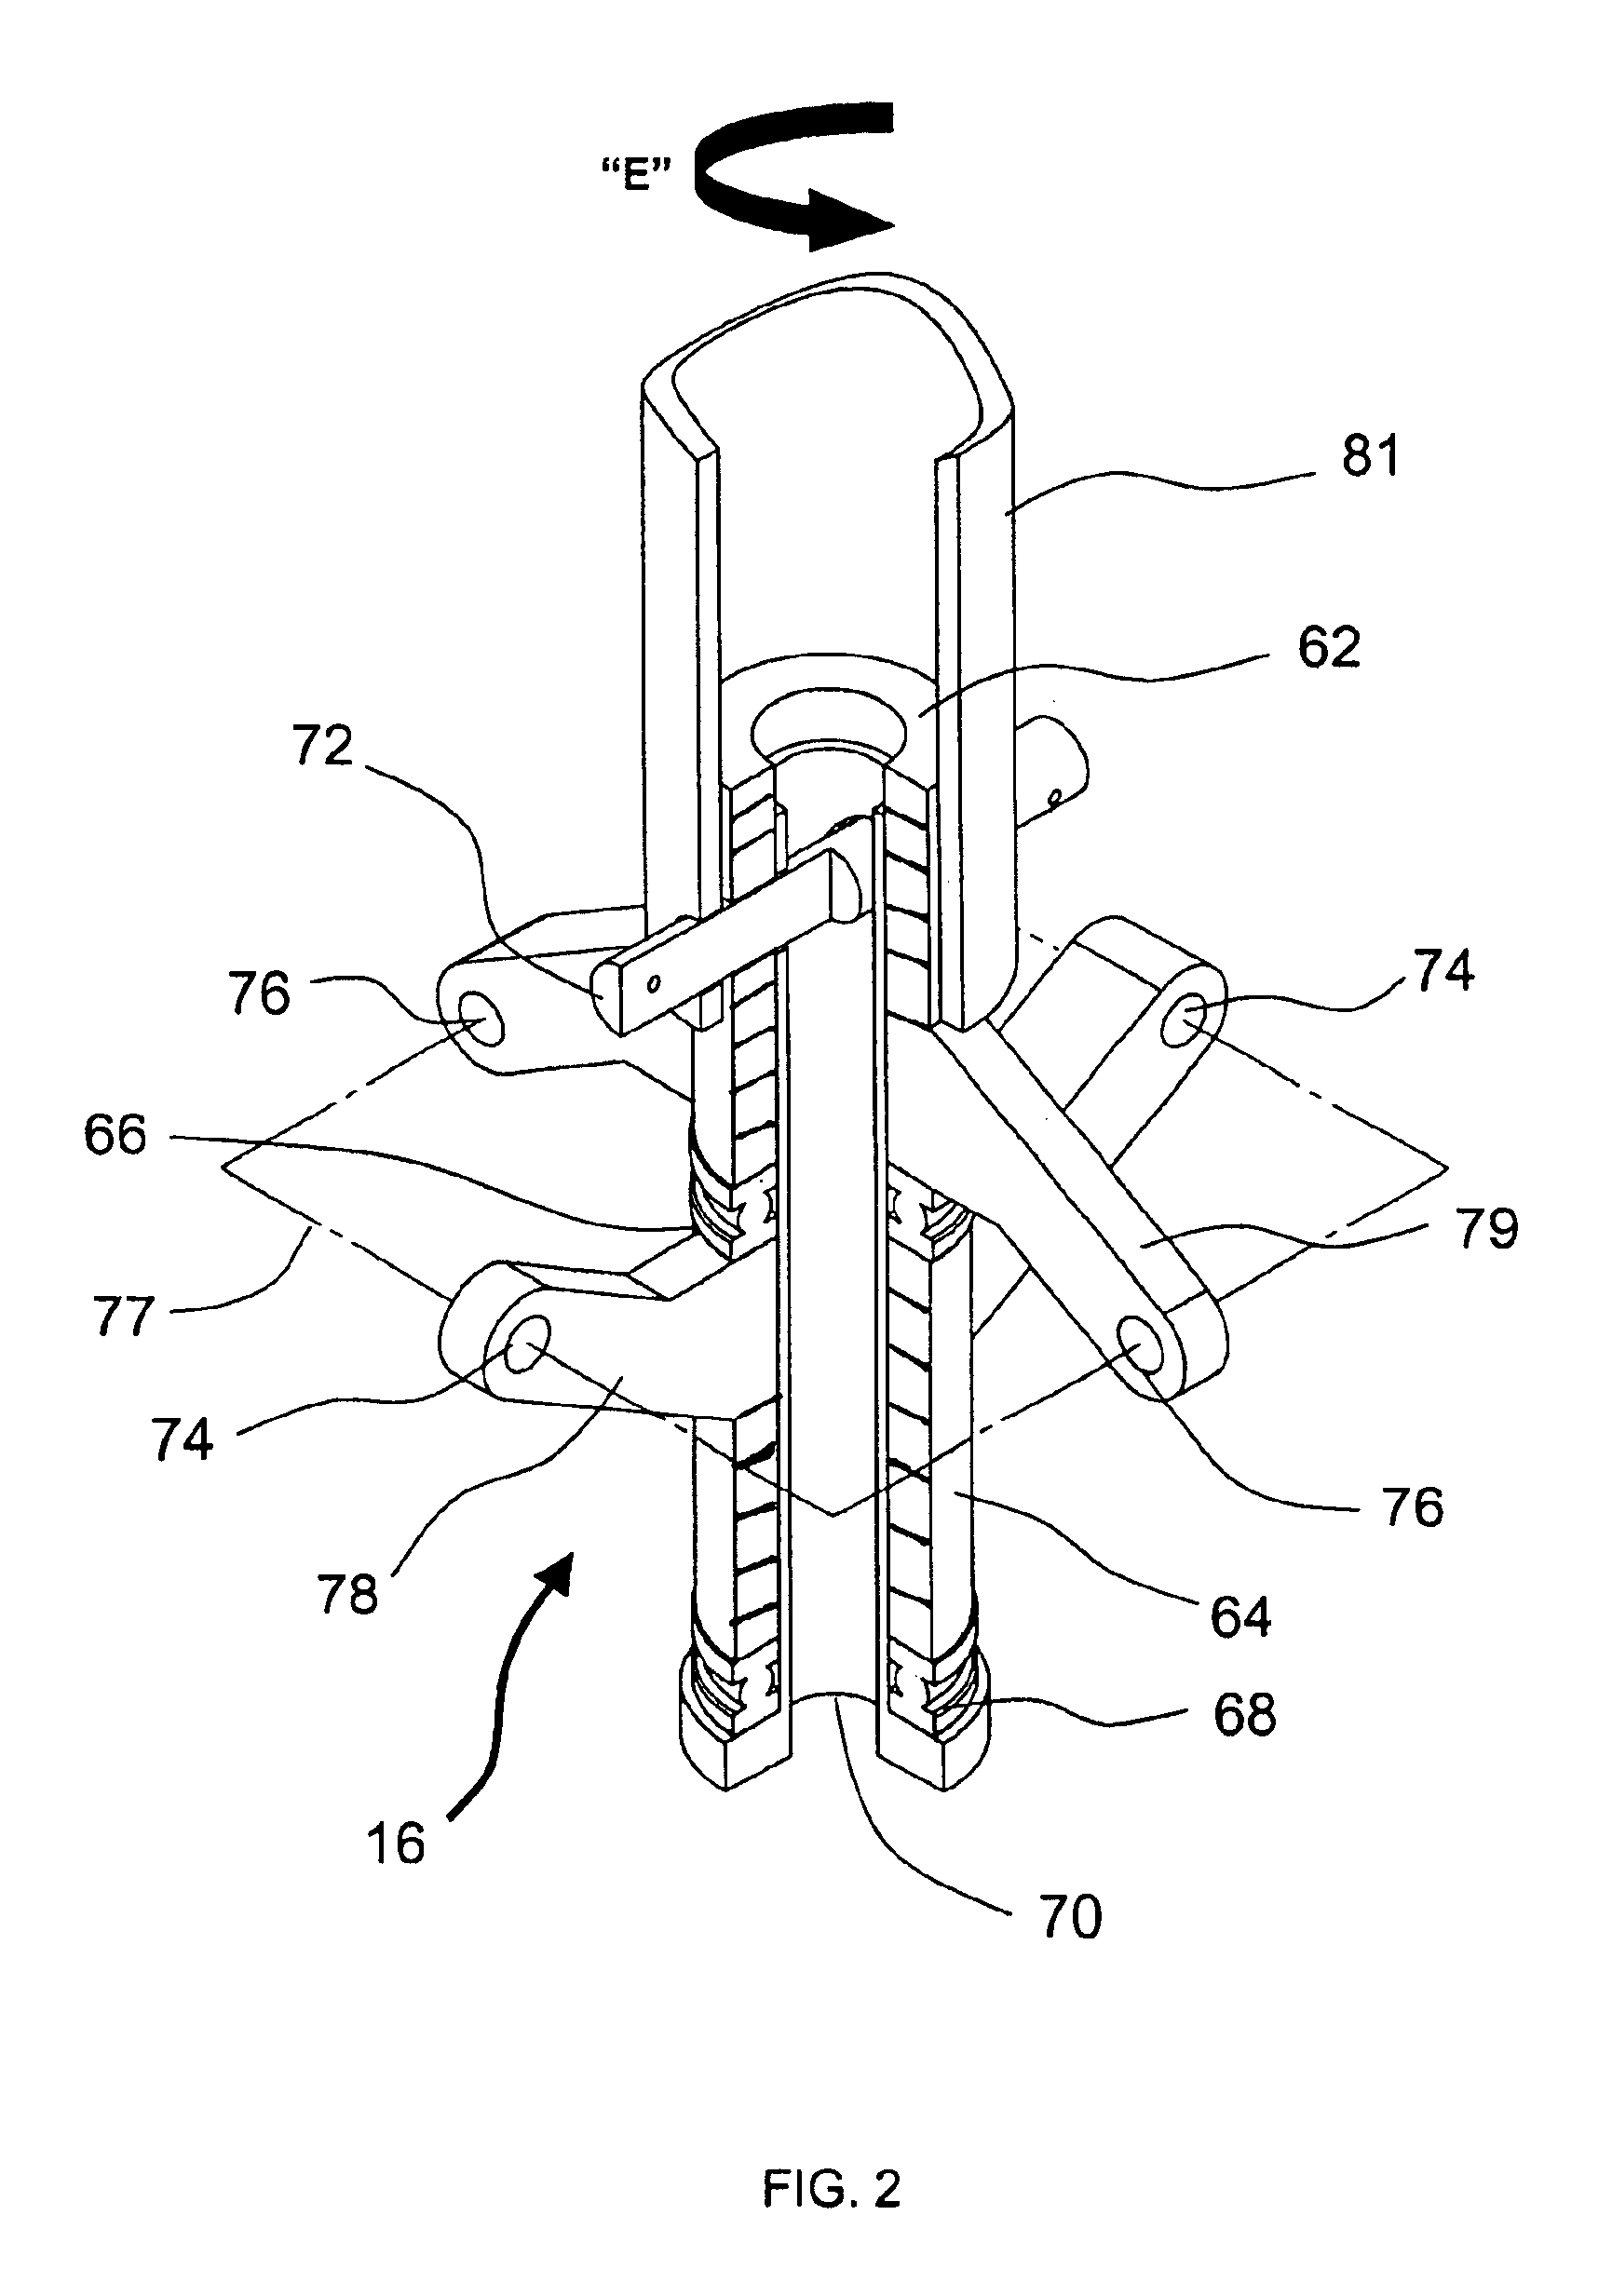 Combined in-plane shear and multi-axial tension or compression testing apparatus